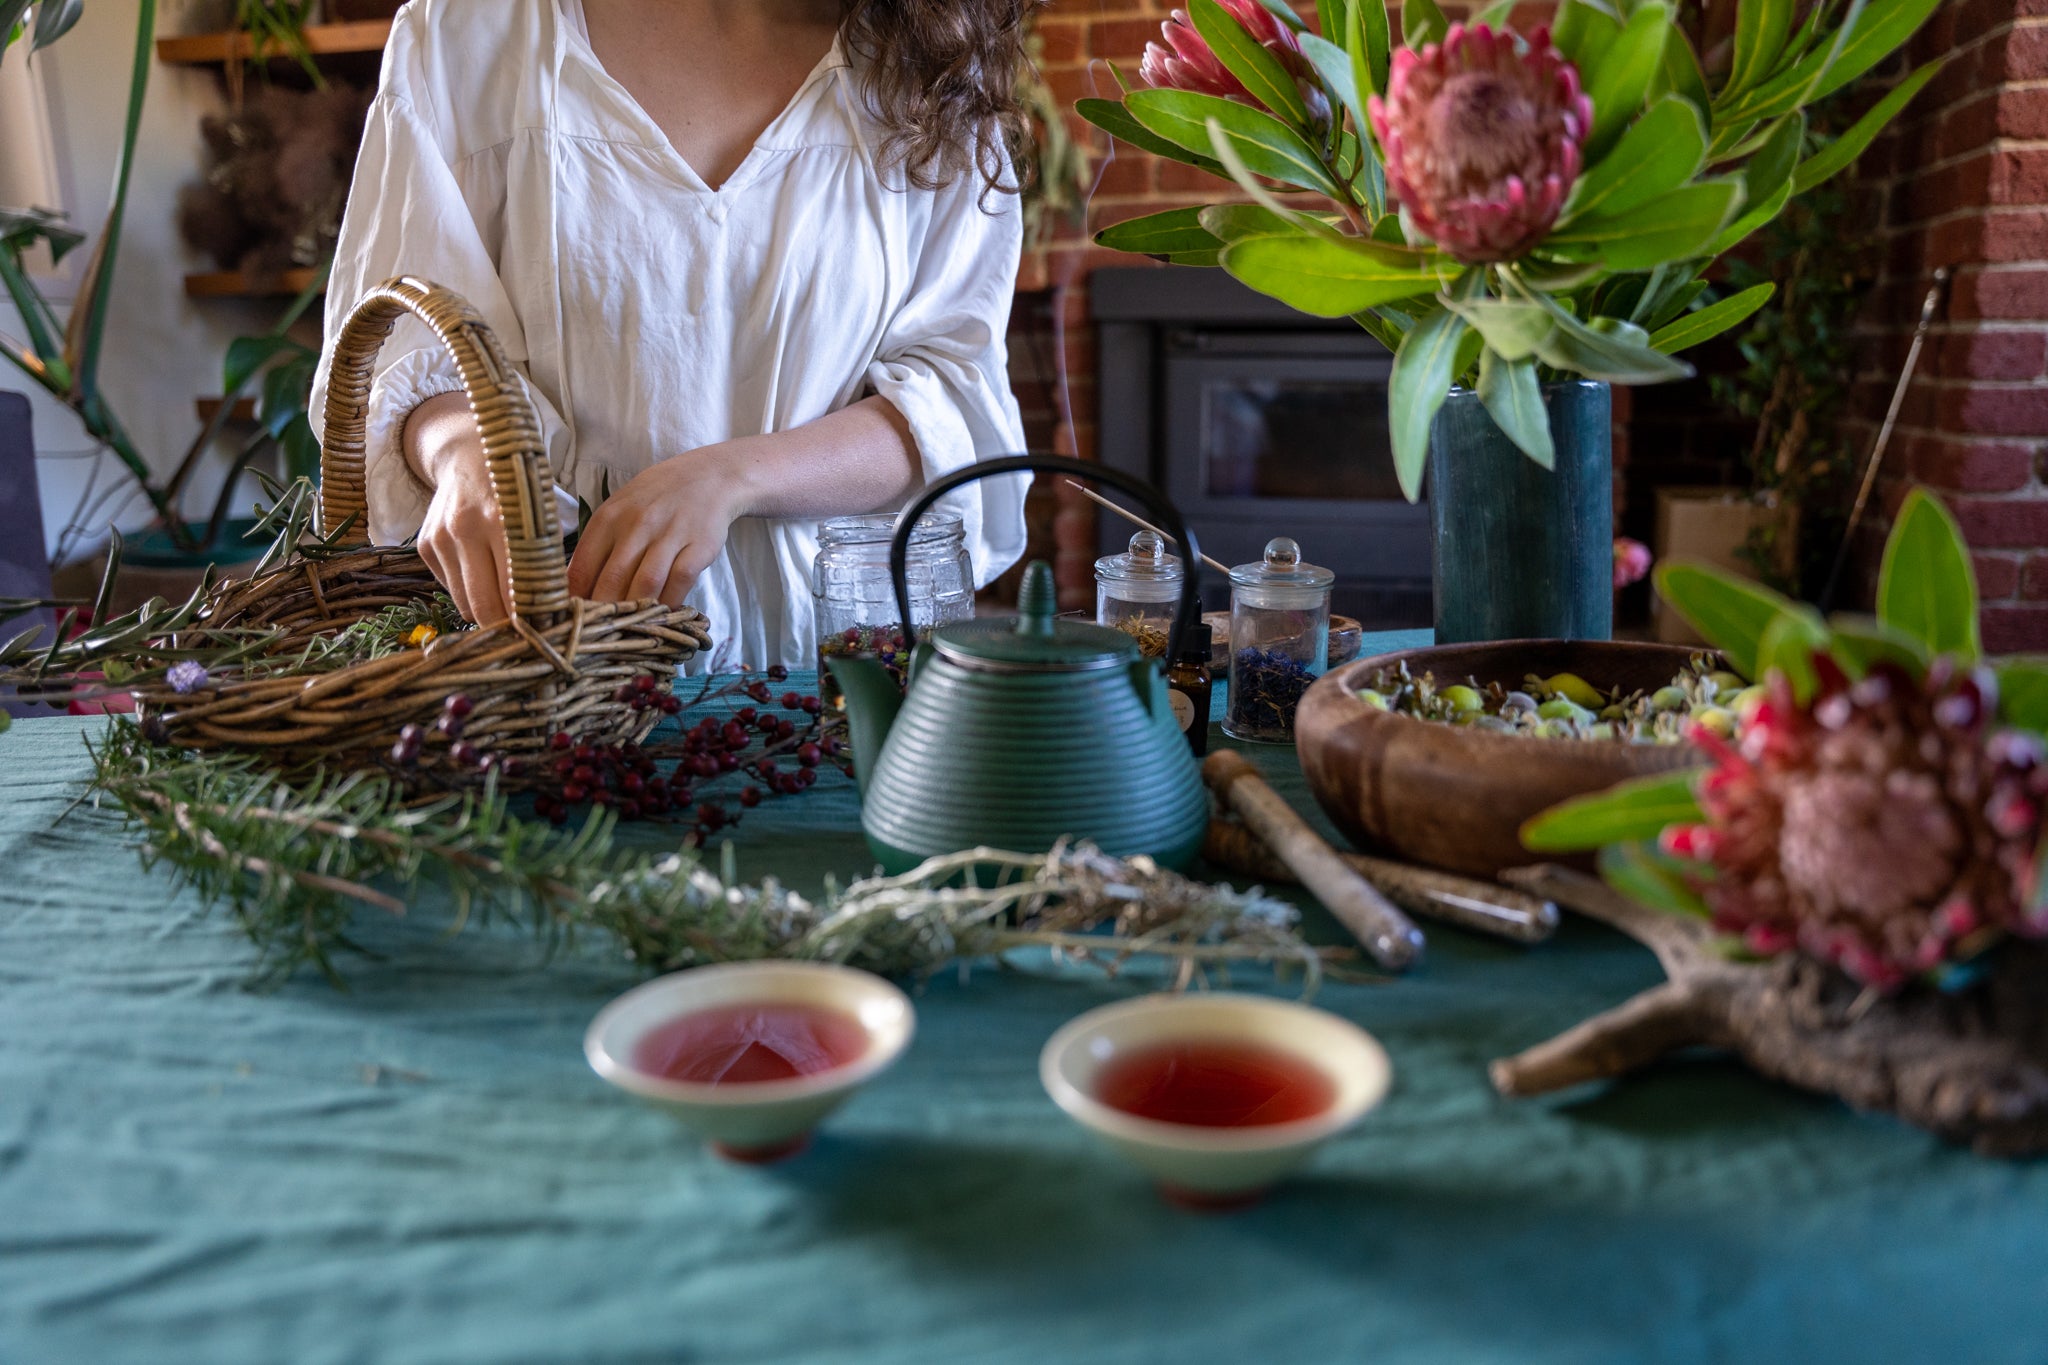 Are there any specific philosophies or traditions that influence your herbal practice?